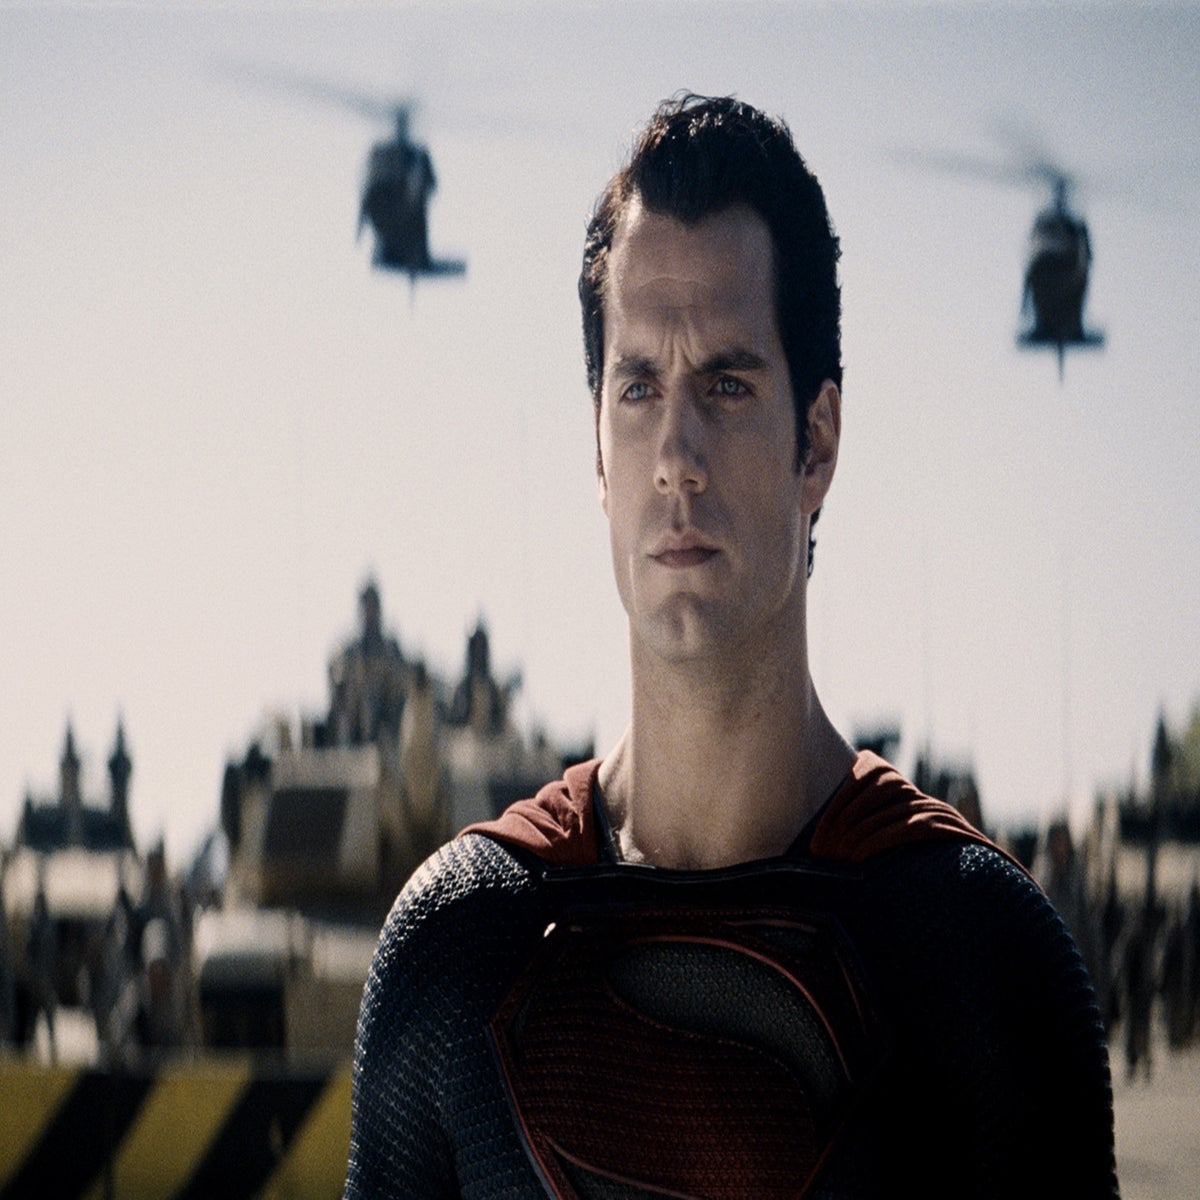 Man Of Steel Review: Henry Cavill Is Superman